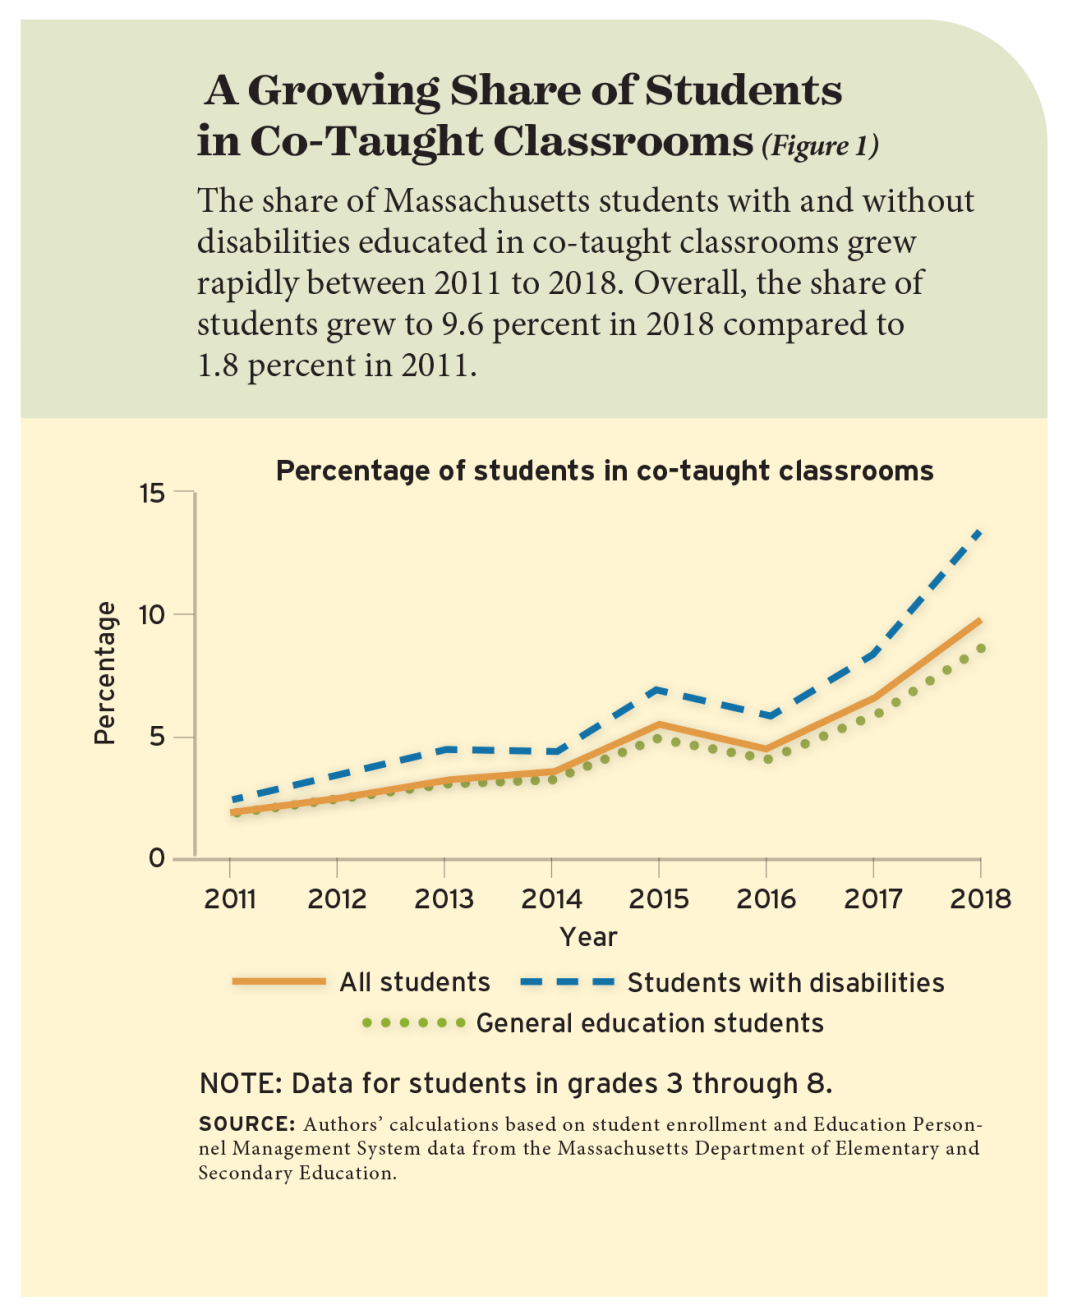 A Growing Share of Students in Co-Taught Classrooms (Figure 1)